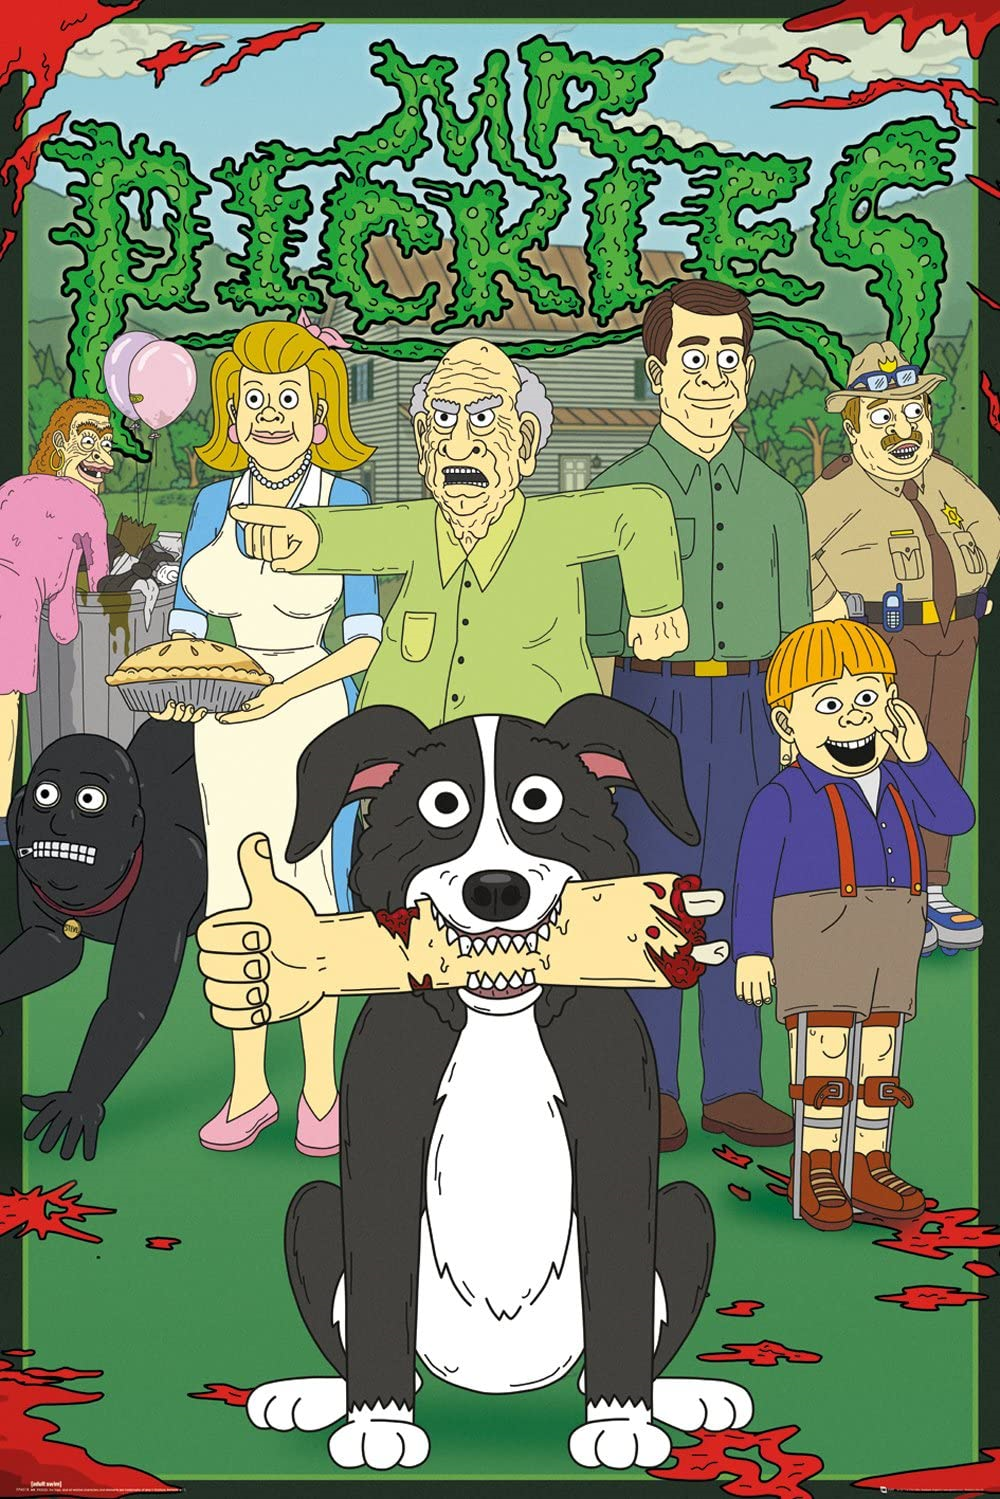 Mr Pickles S2 E1 (2016) - Streaming, replay - Diffusion TV et plateformes